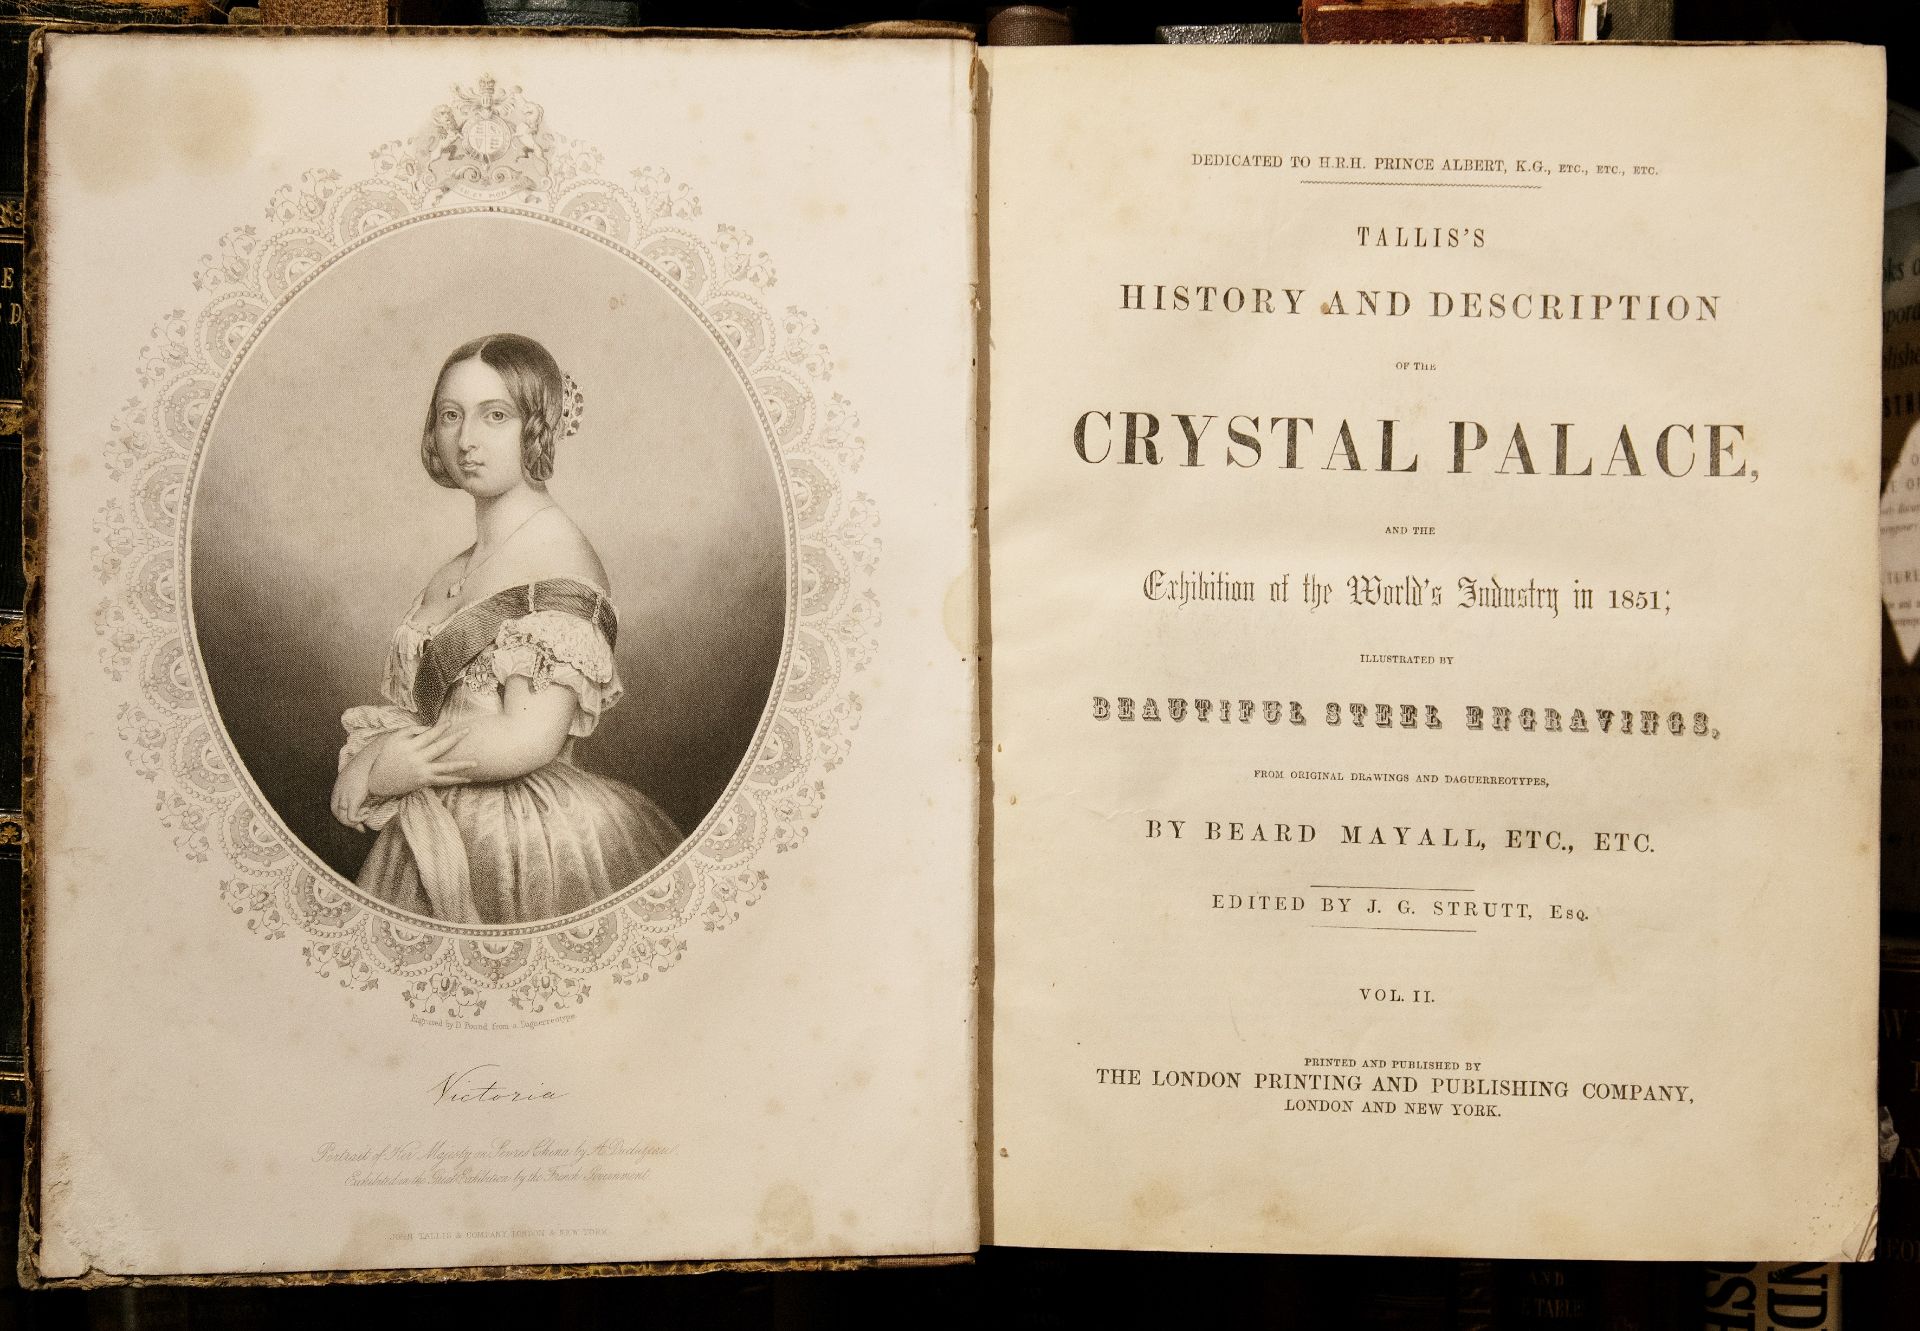 Mayall (Beard) Tallis's History and Description of the Crystal Palace and the Exhibition of the